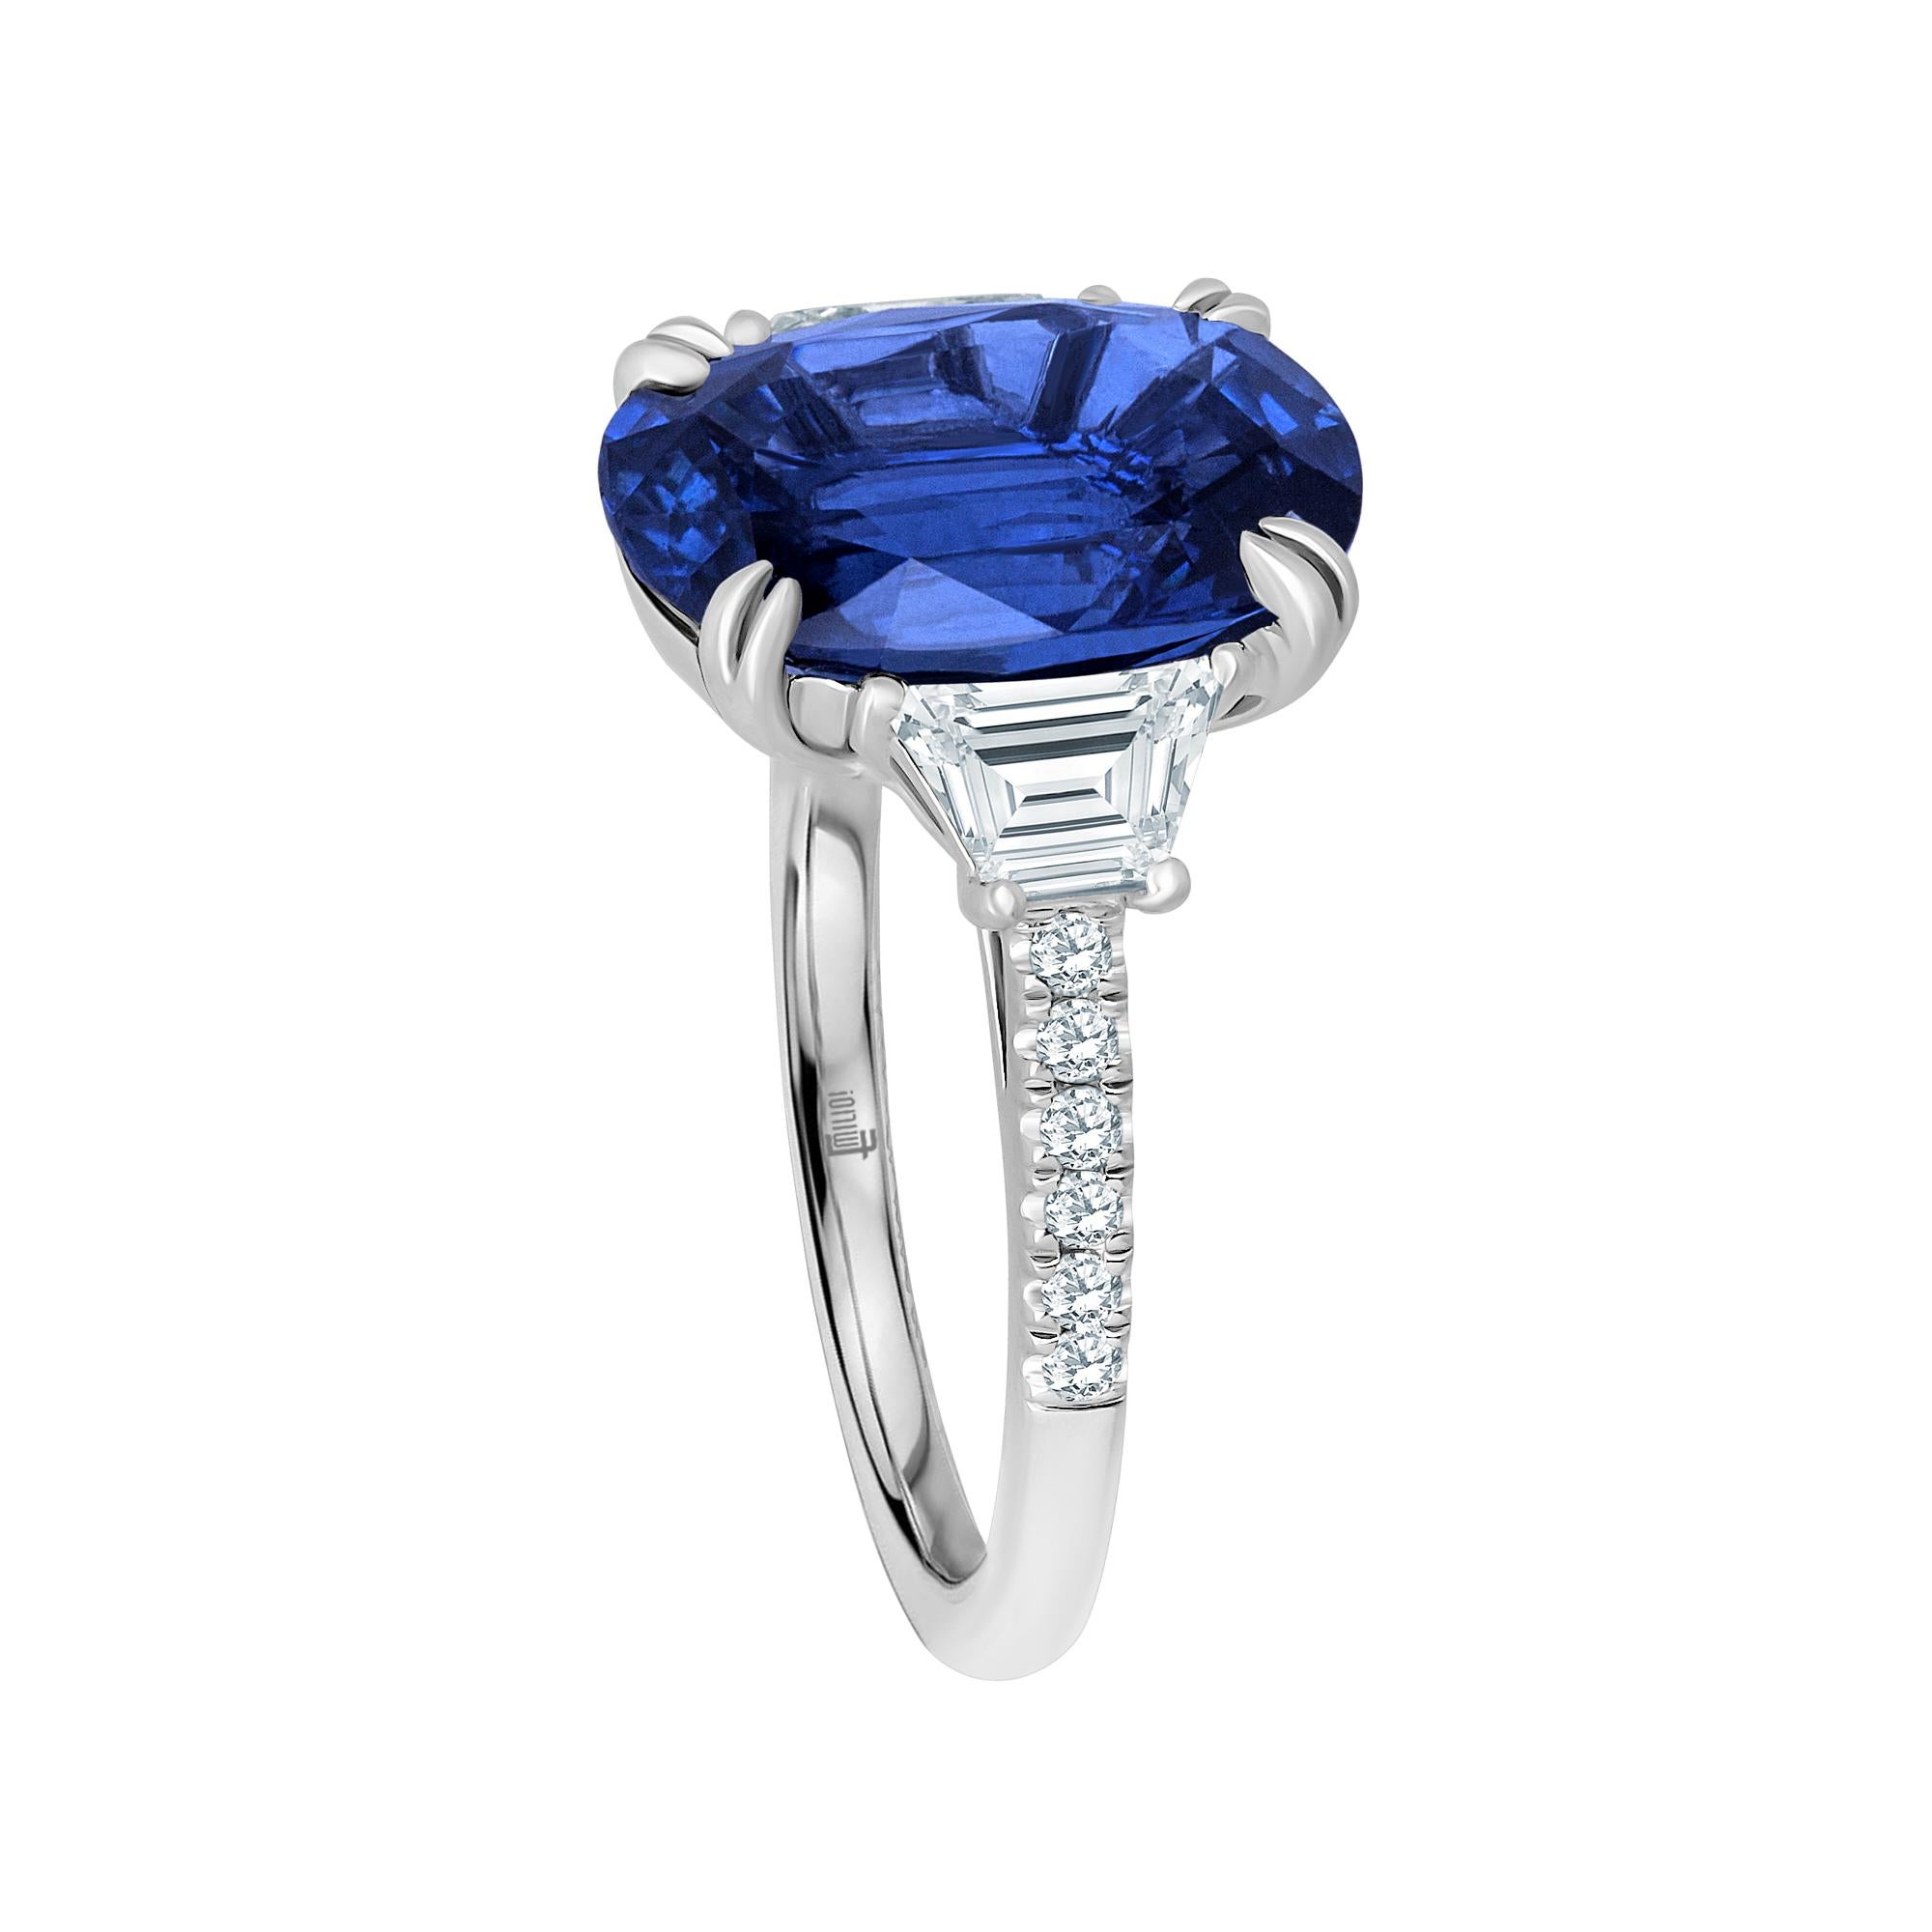 Emilio Jewelry Certified 7.96 Carat Sapphire Diamond Ring 
This amazing ring is unique and well thought out before Emilio designed it! Most women today want a ring that is striking, yet humble enough to wear to perform everyday errands. This ring is